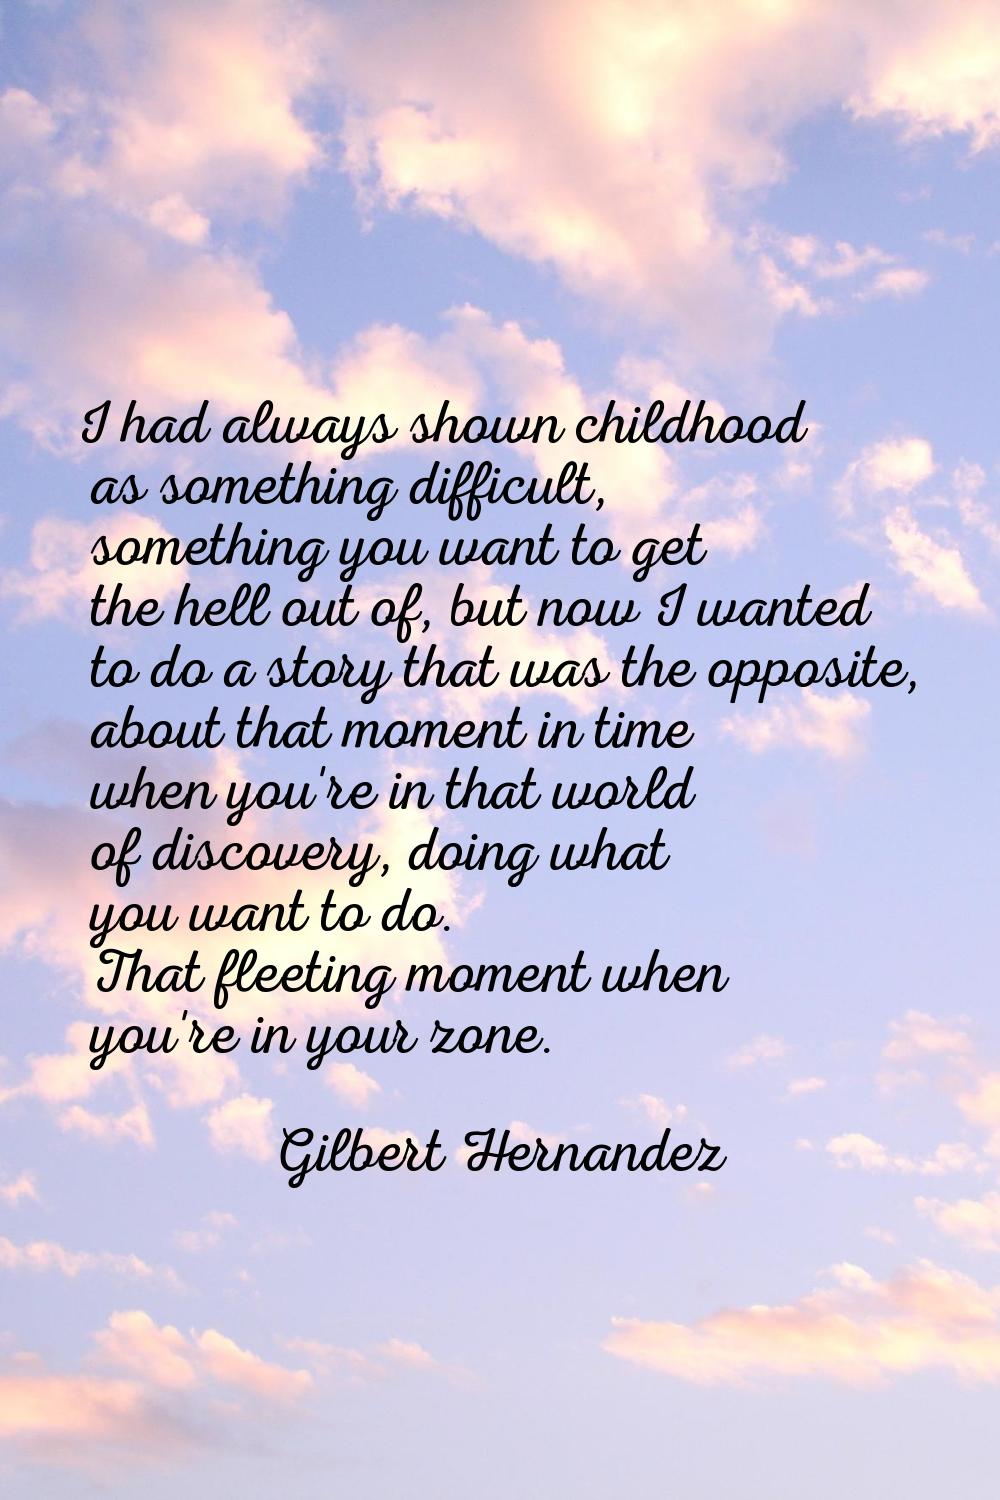 I had always shown childhood as something difficult, something you want to get the hell out of, but